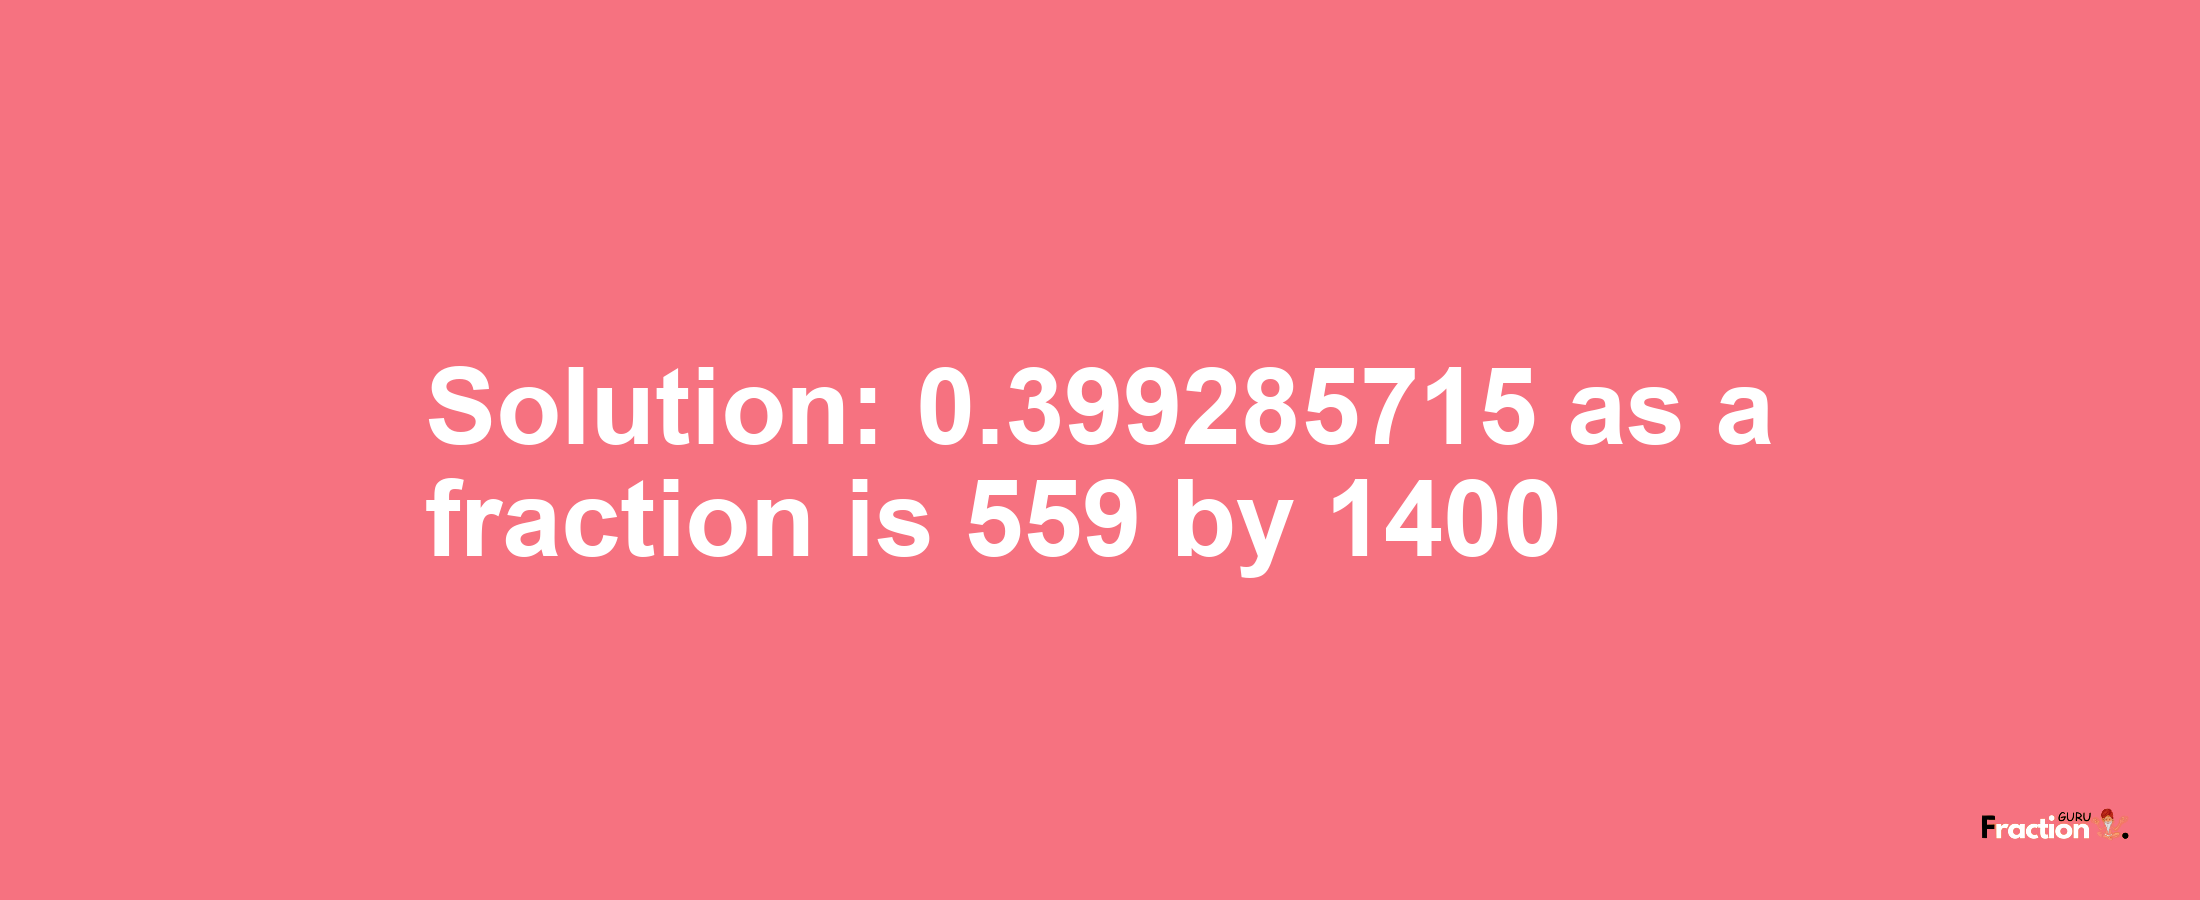 Solution:0.399285715 as a fraction is 559/1400